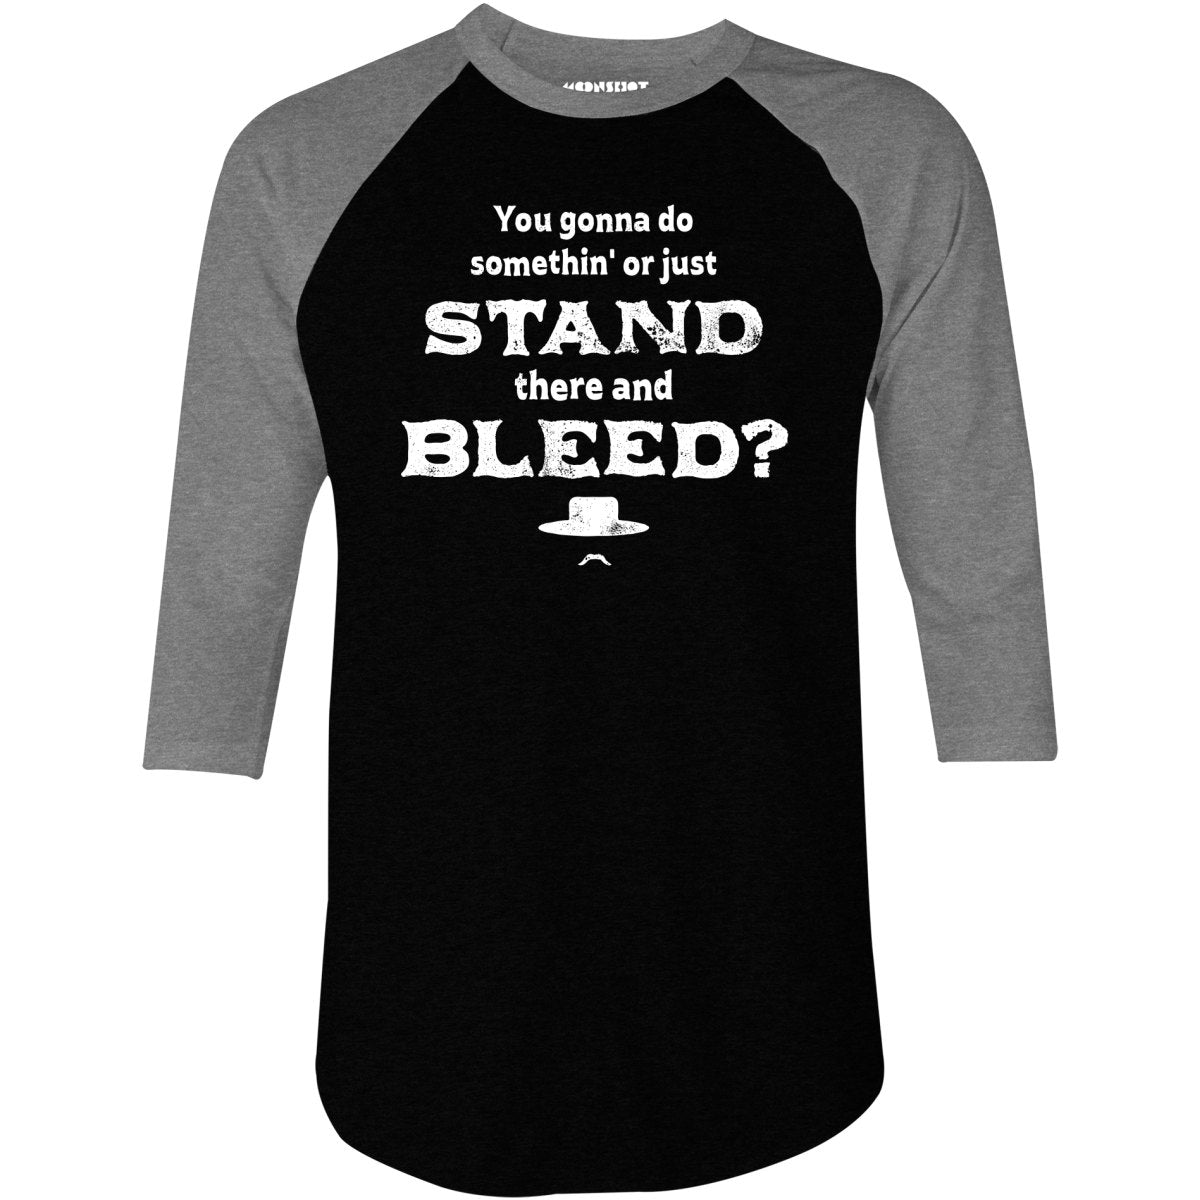 Tombstone Stand There and Bleed - 3/4 Sleeve Raglan T-Shirt